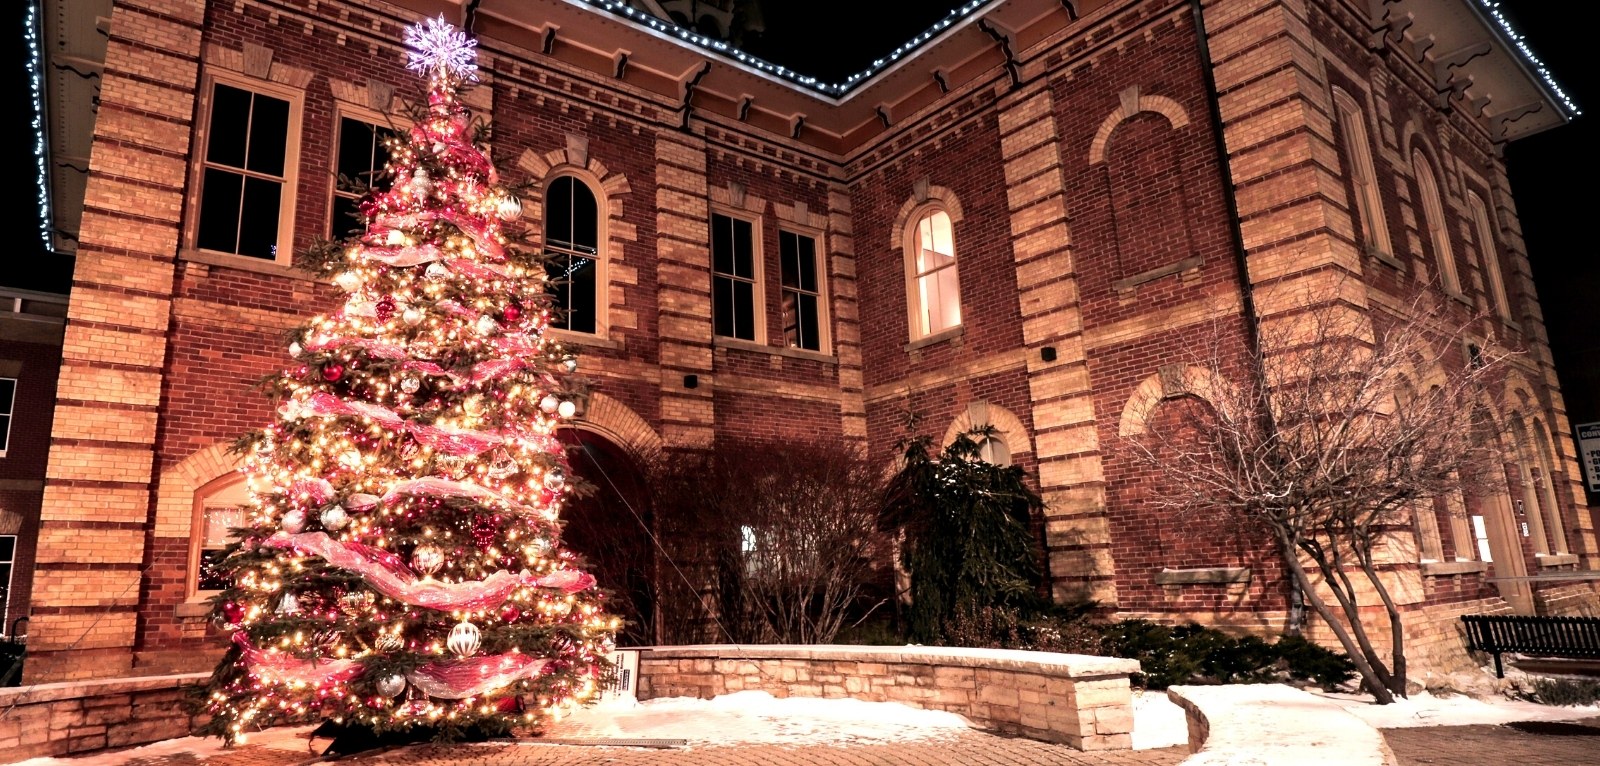 A decorated Christmas tree in front of a brick historic building. It is night time and the tree is brilliantly lit.